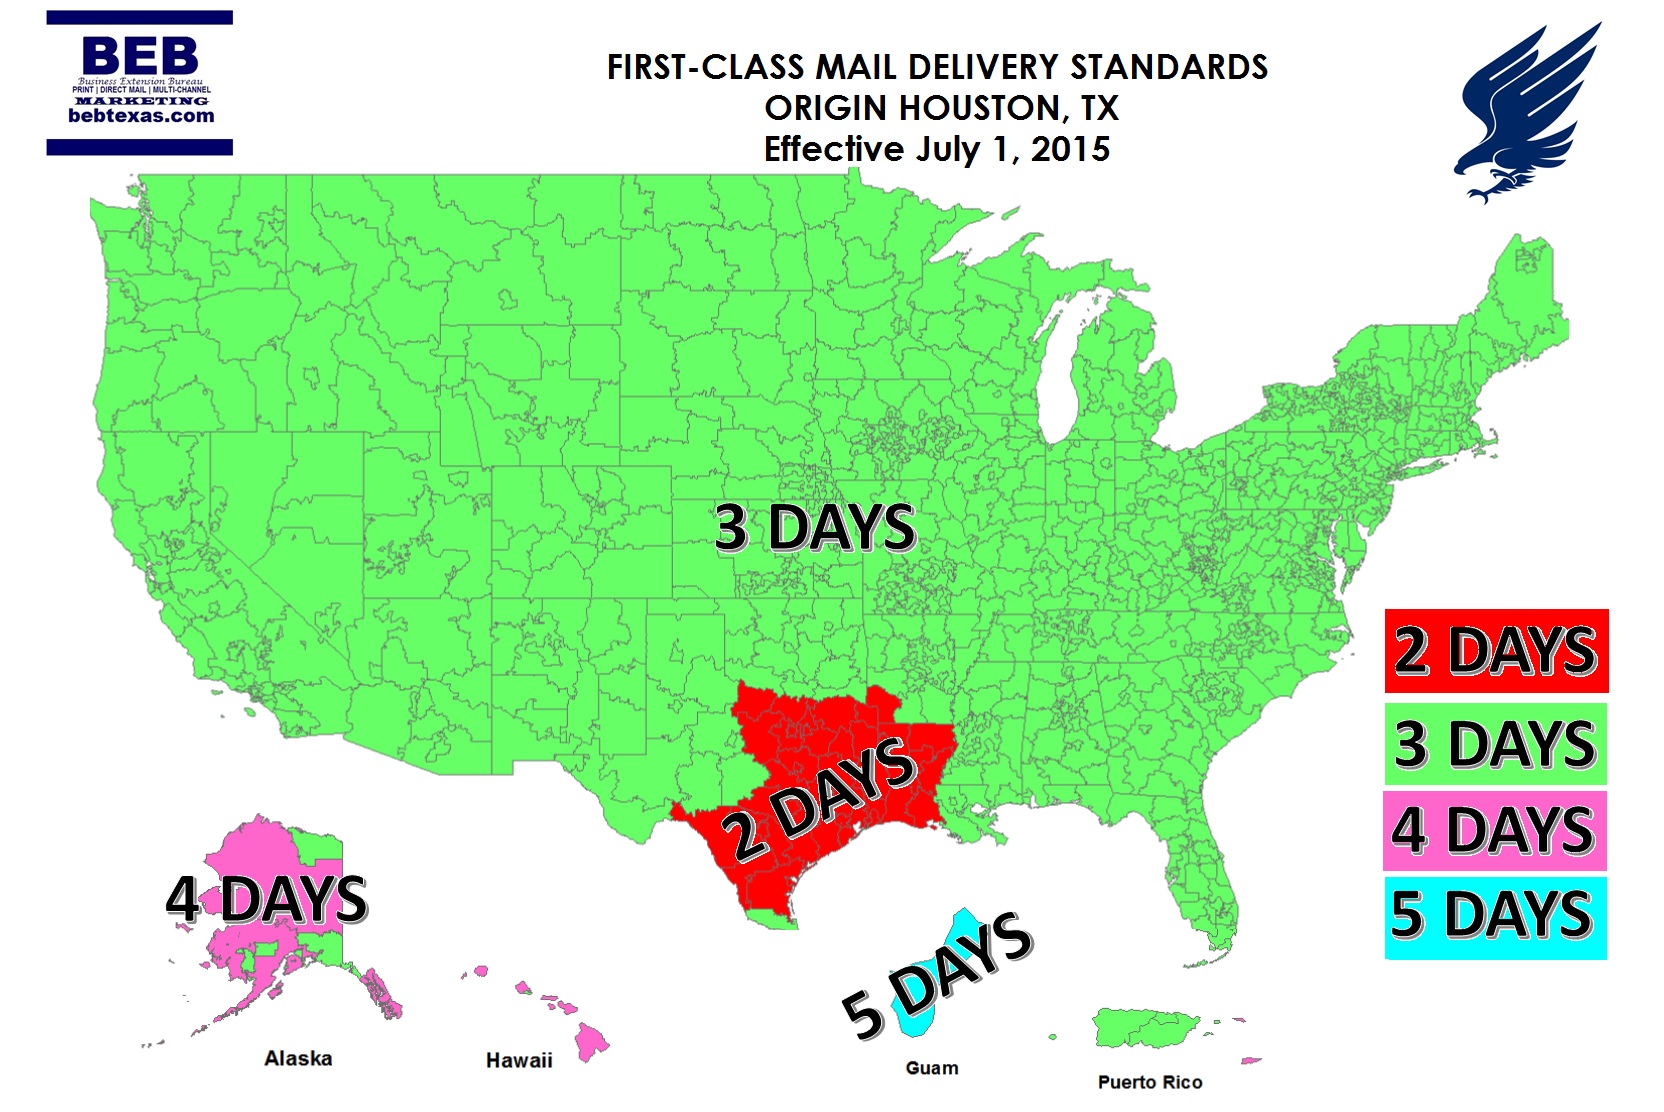 First Class Mail Delivery Standards Map effective July 1, 2015